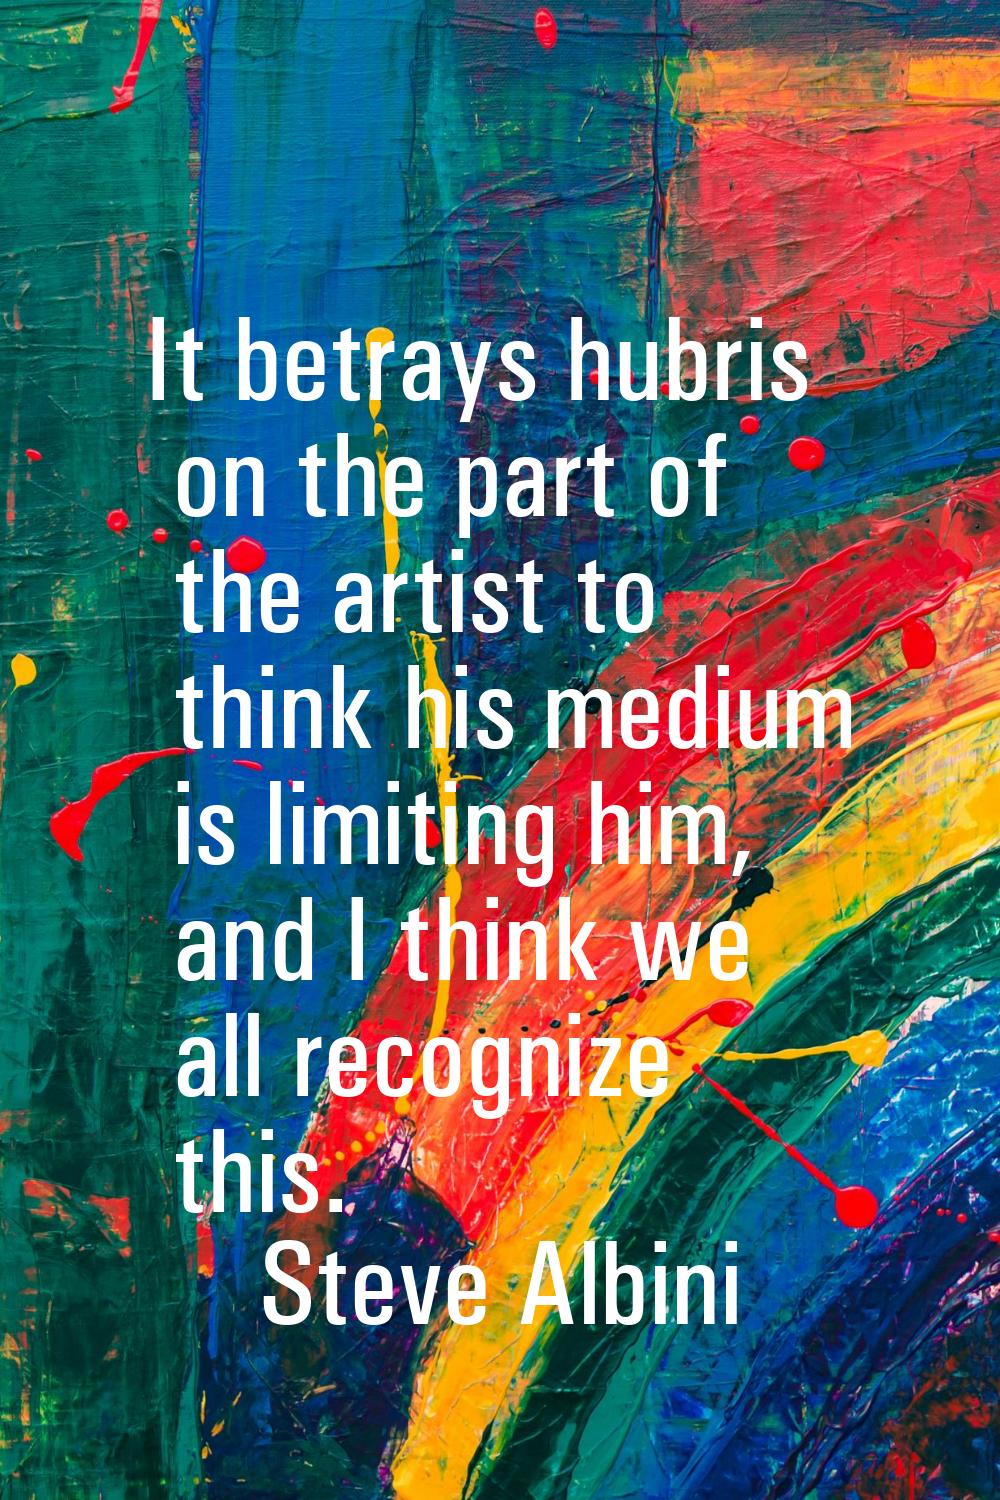 It betrays hubris on the part of the artist to think his medium is limiting him, and I think we all